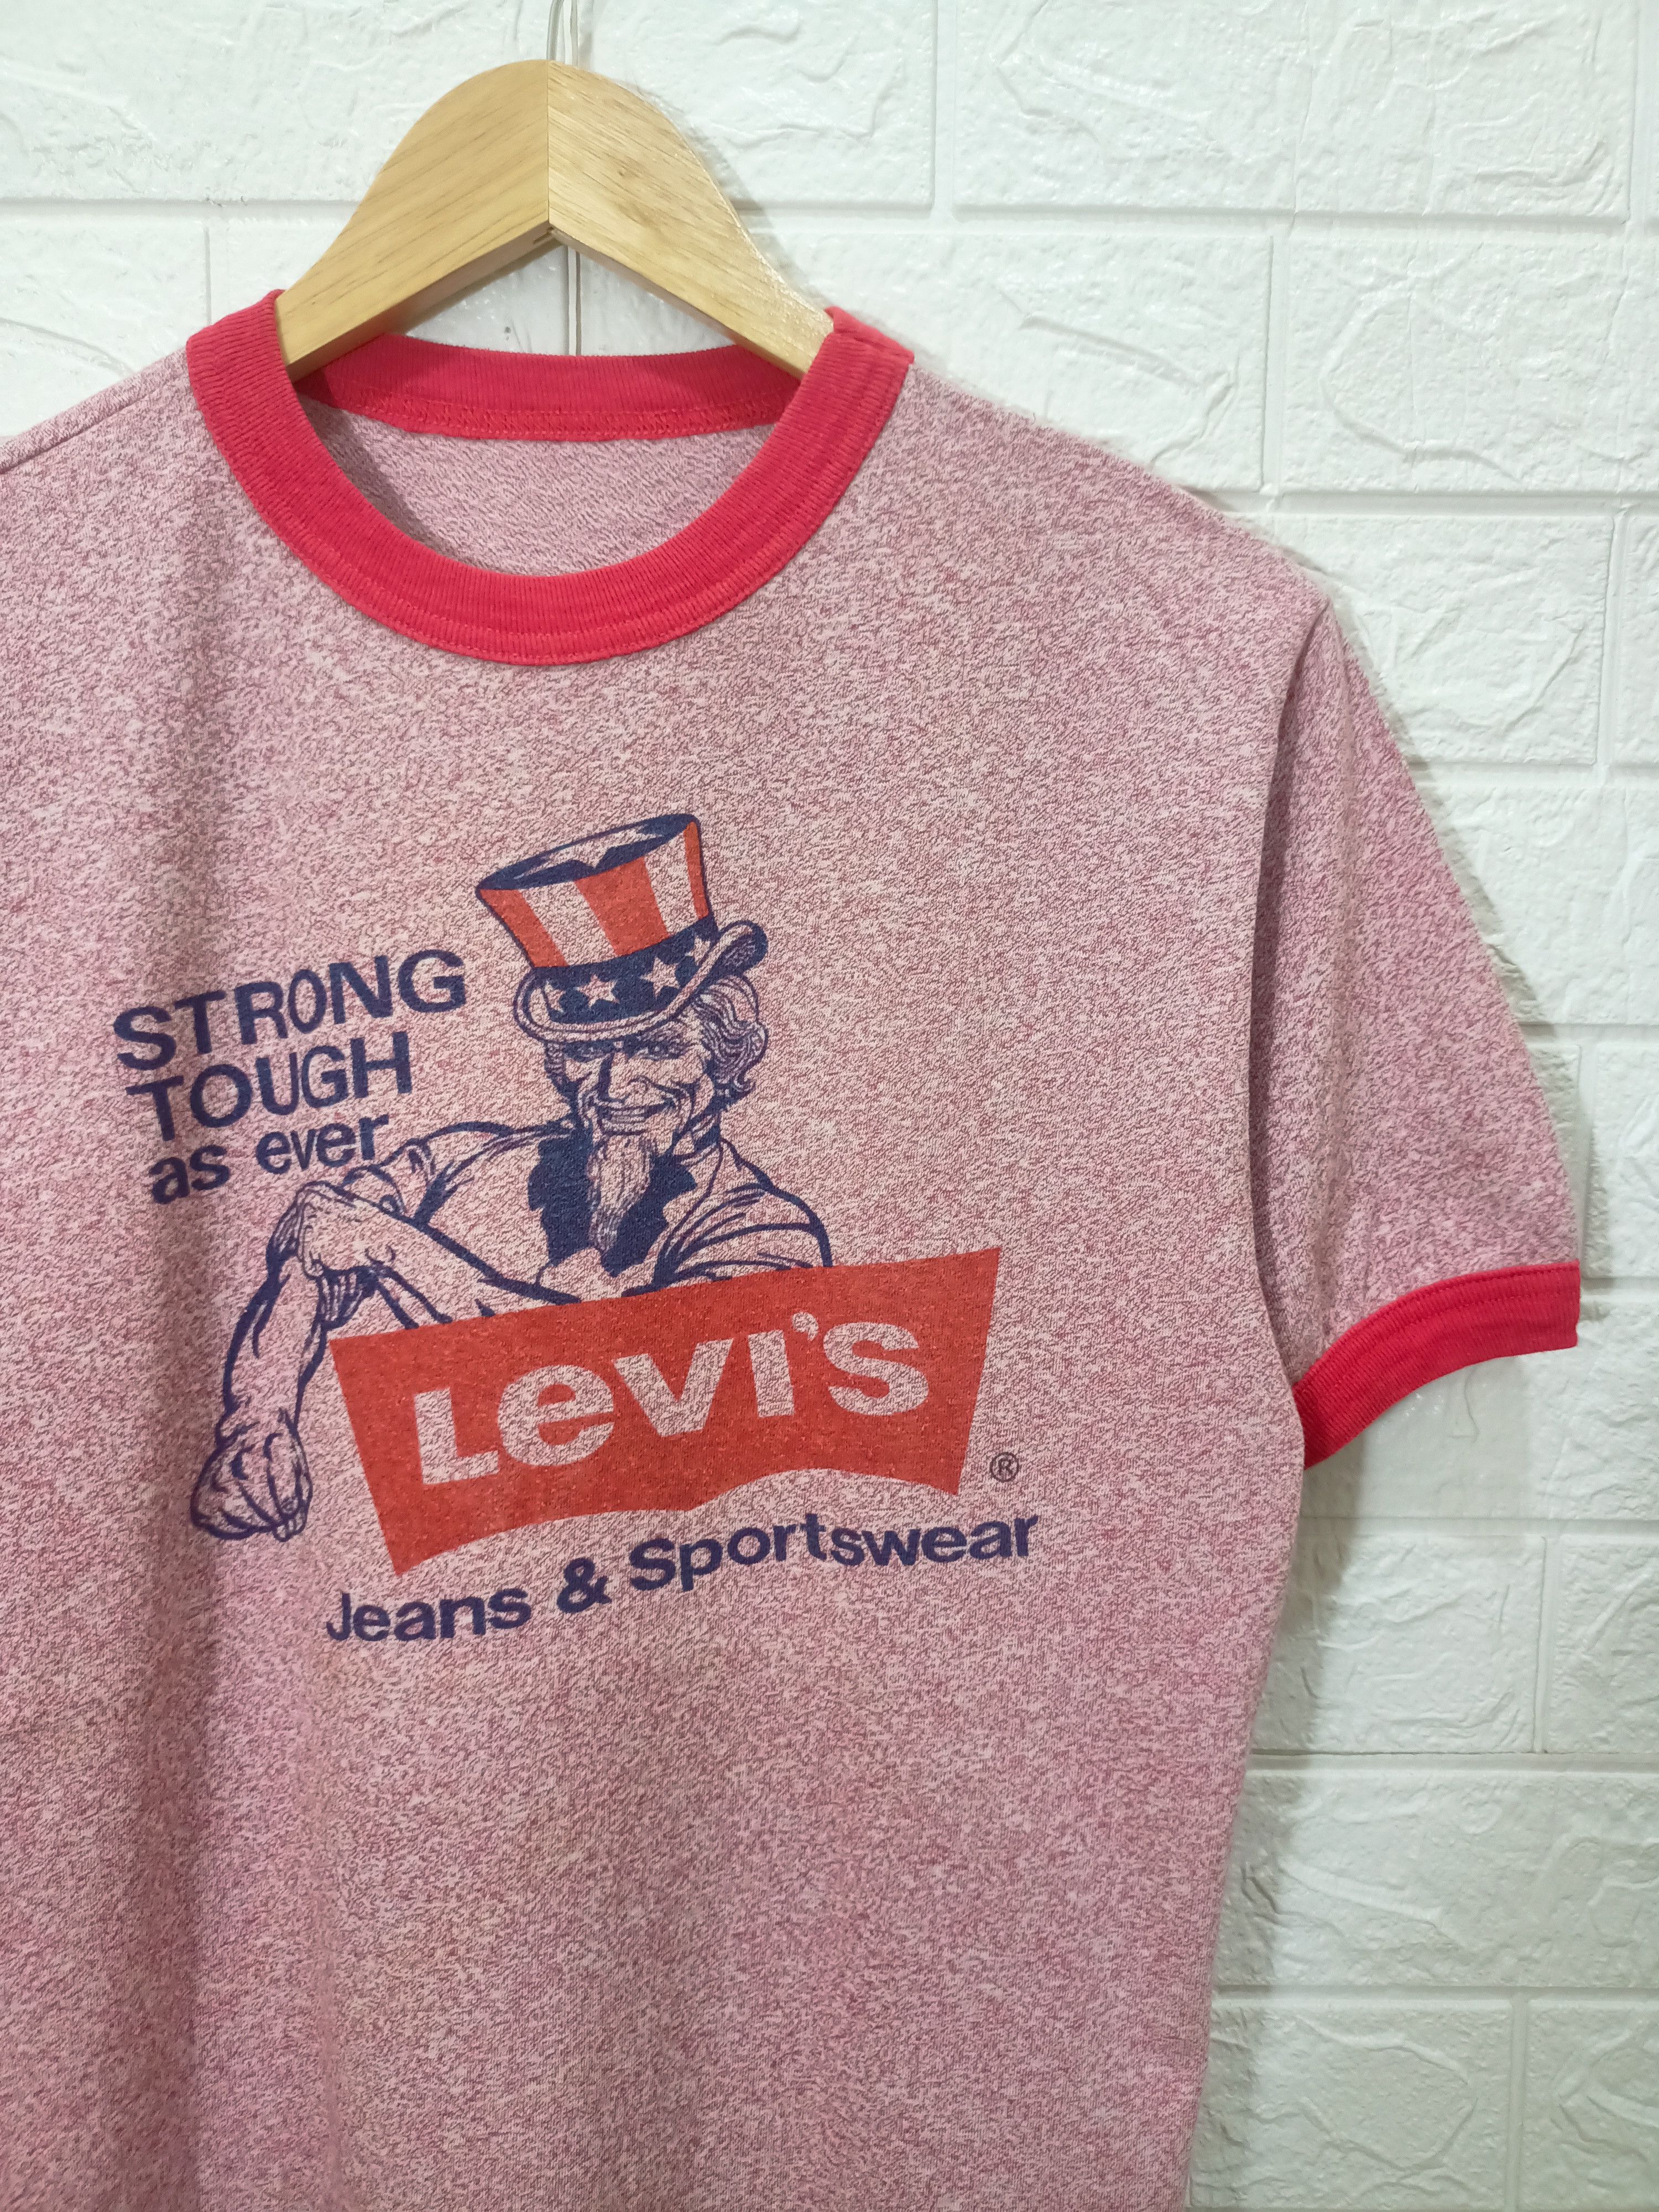 Rare Vintage 80s LEVIS Uncle Sam Strong Tough Printed Tee - 6